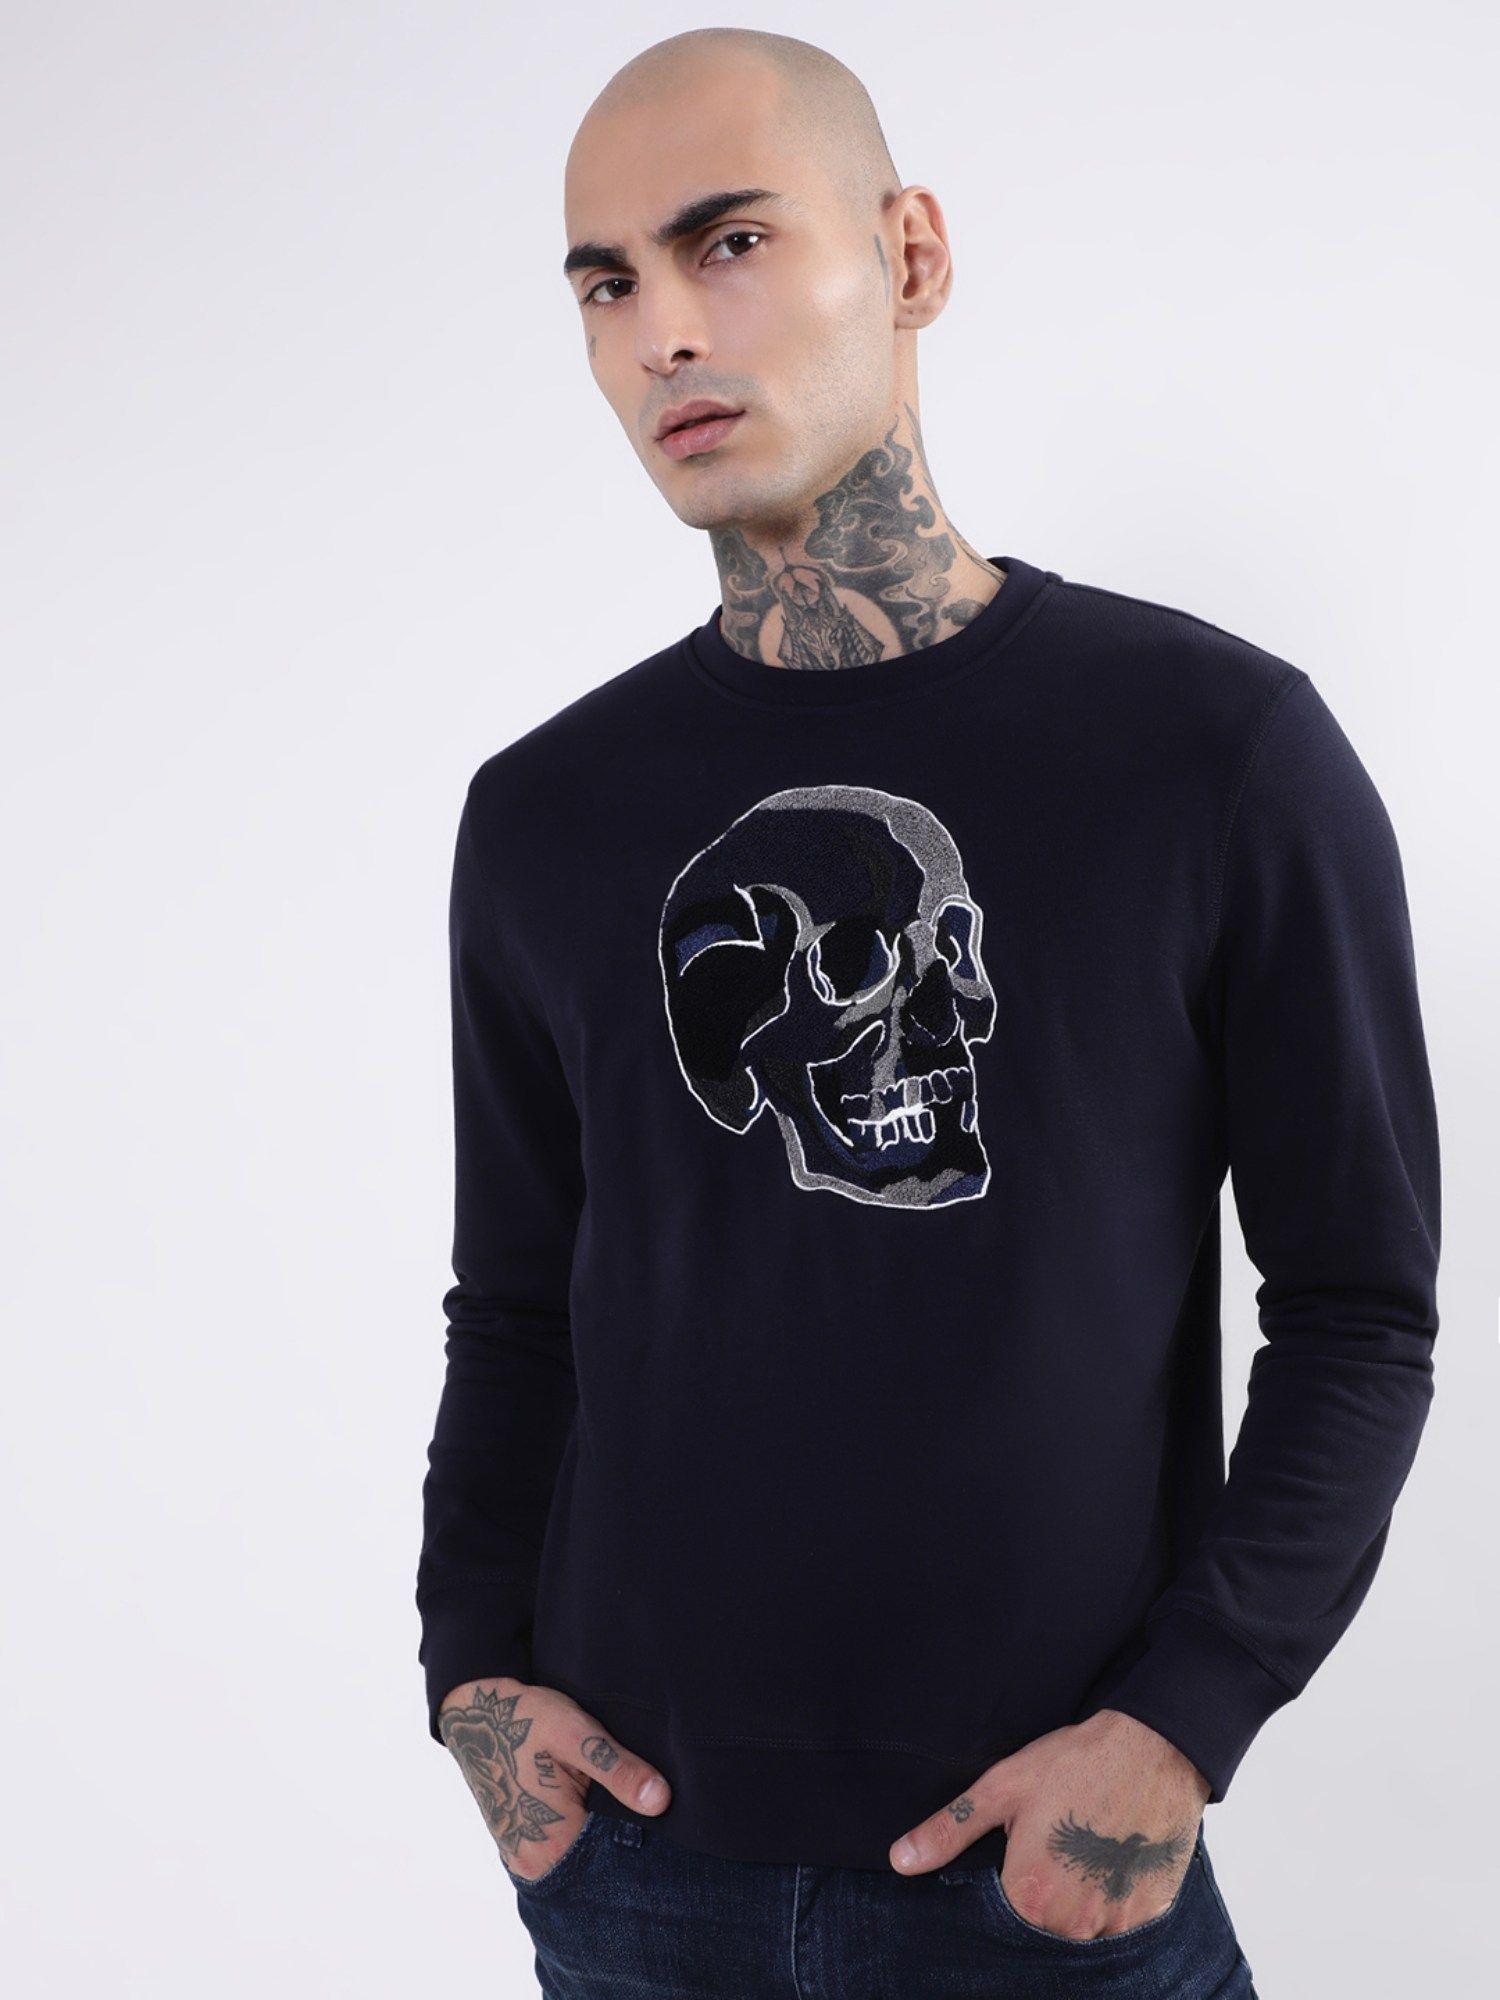 sweatshirt regular fit in cotton polyester blend fabric with embroidered skull